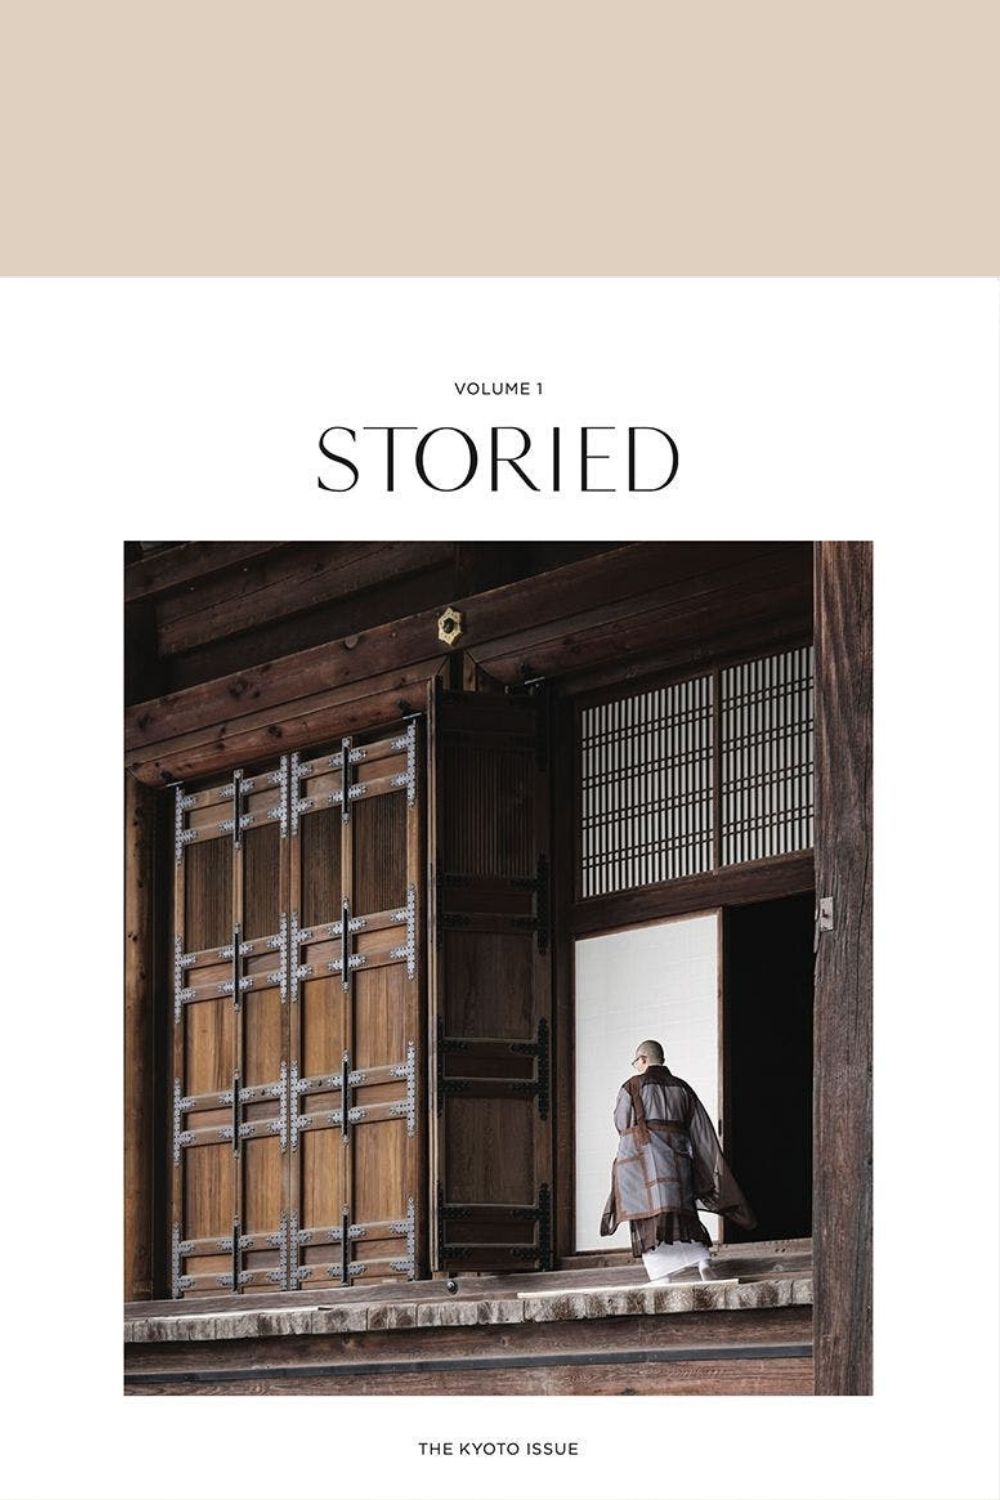 Front cover of Storied magazine Volume One - Kyoto